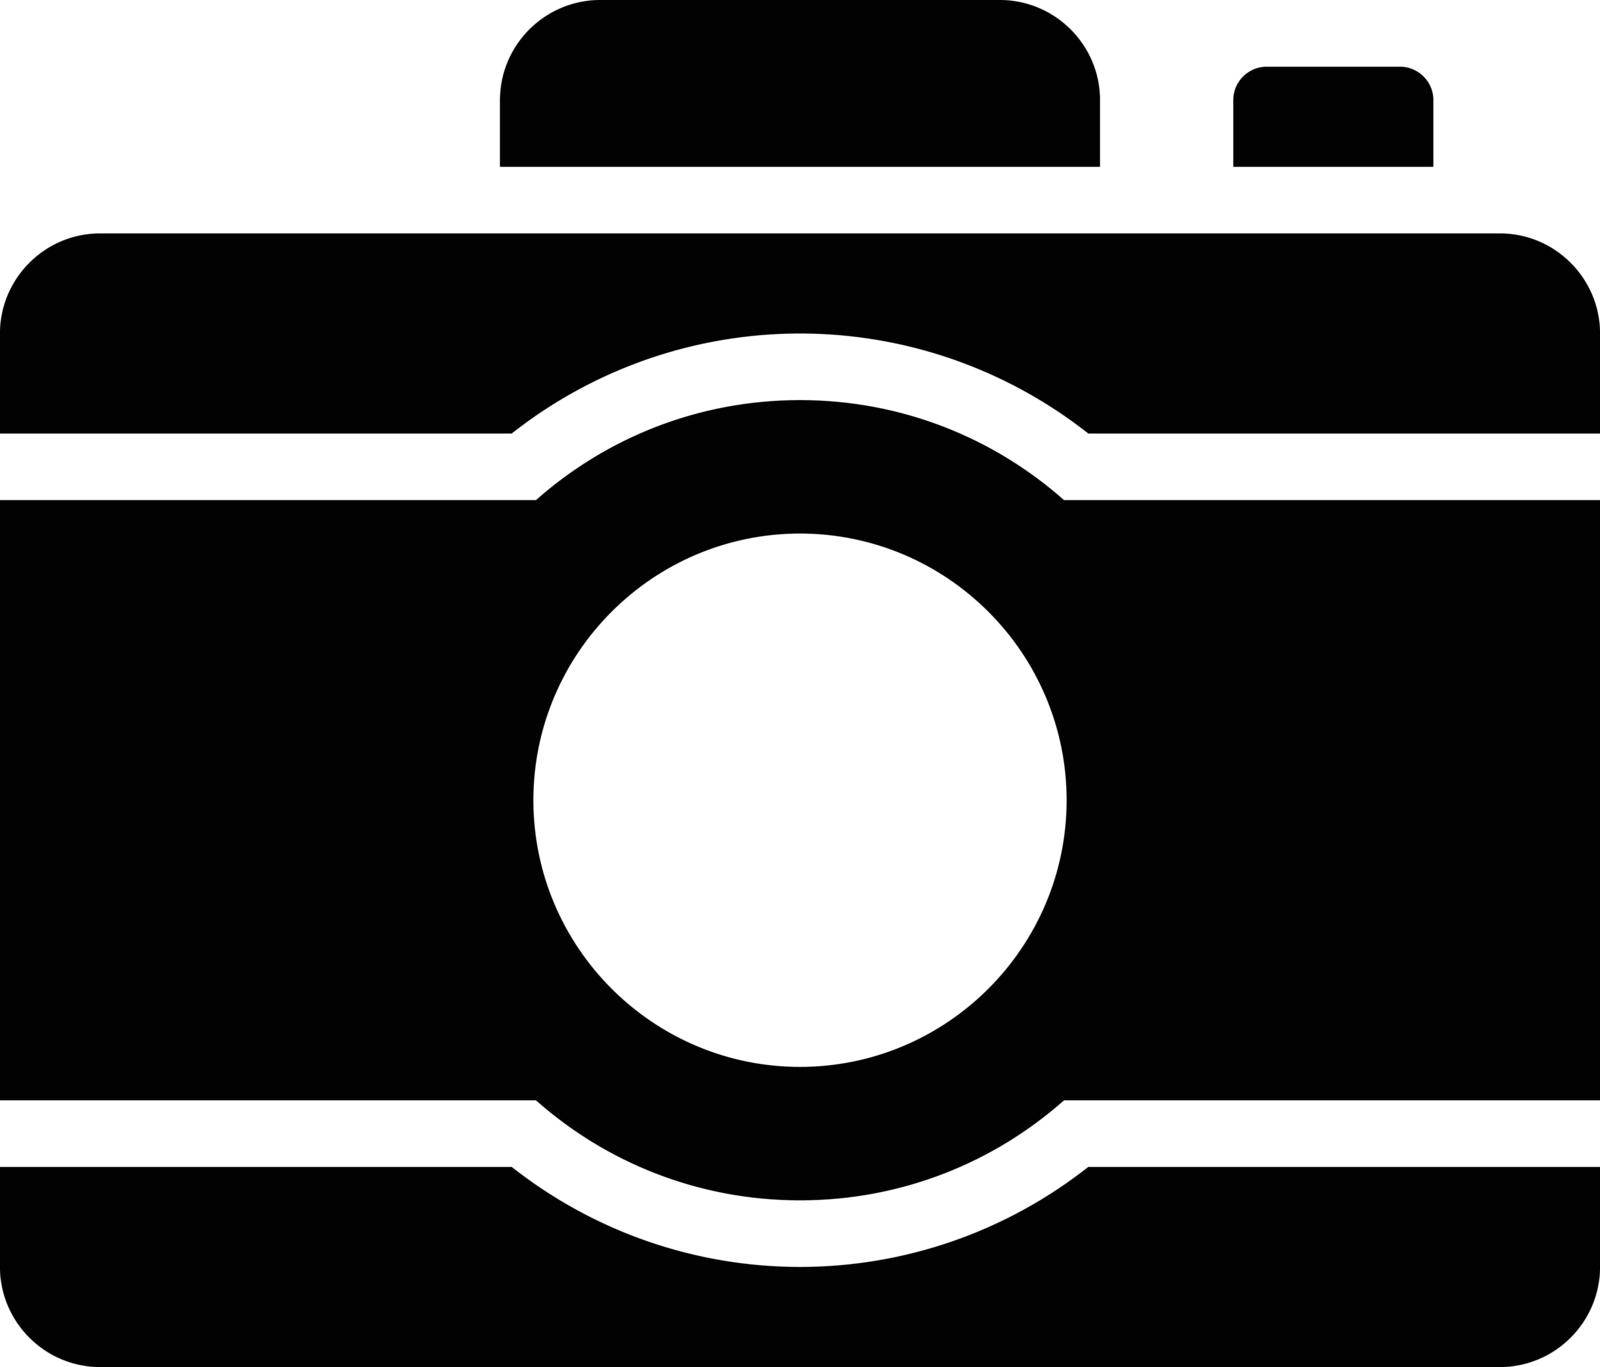 camera Vector illustration on a transparent background. Premium quality symmbols. Glyphs vector icons for concept and graphic design.